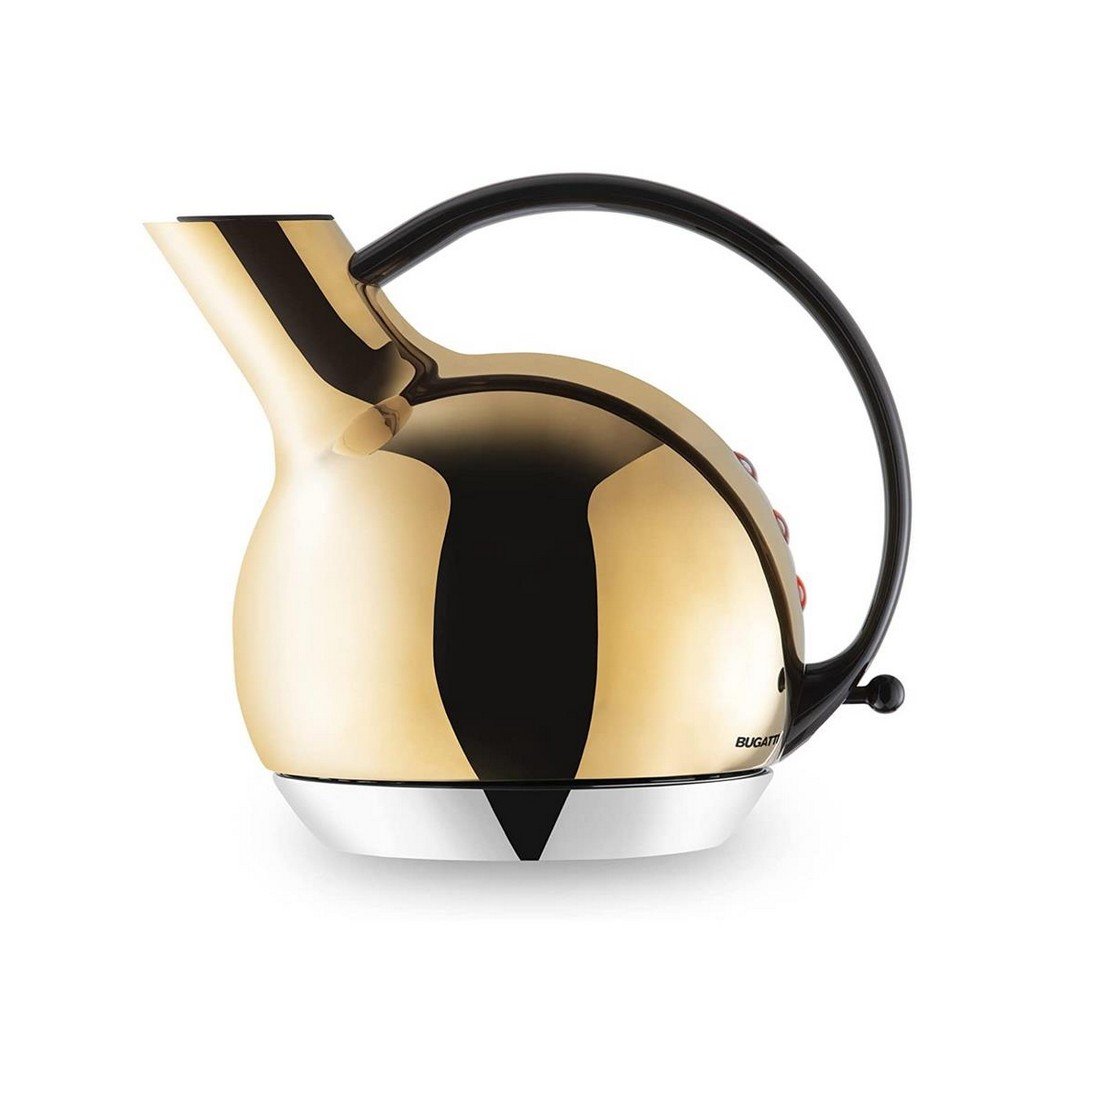 giulietta, electric kettle in 18/10 stainless steel - 1.2 l - gold